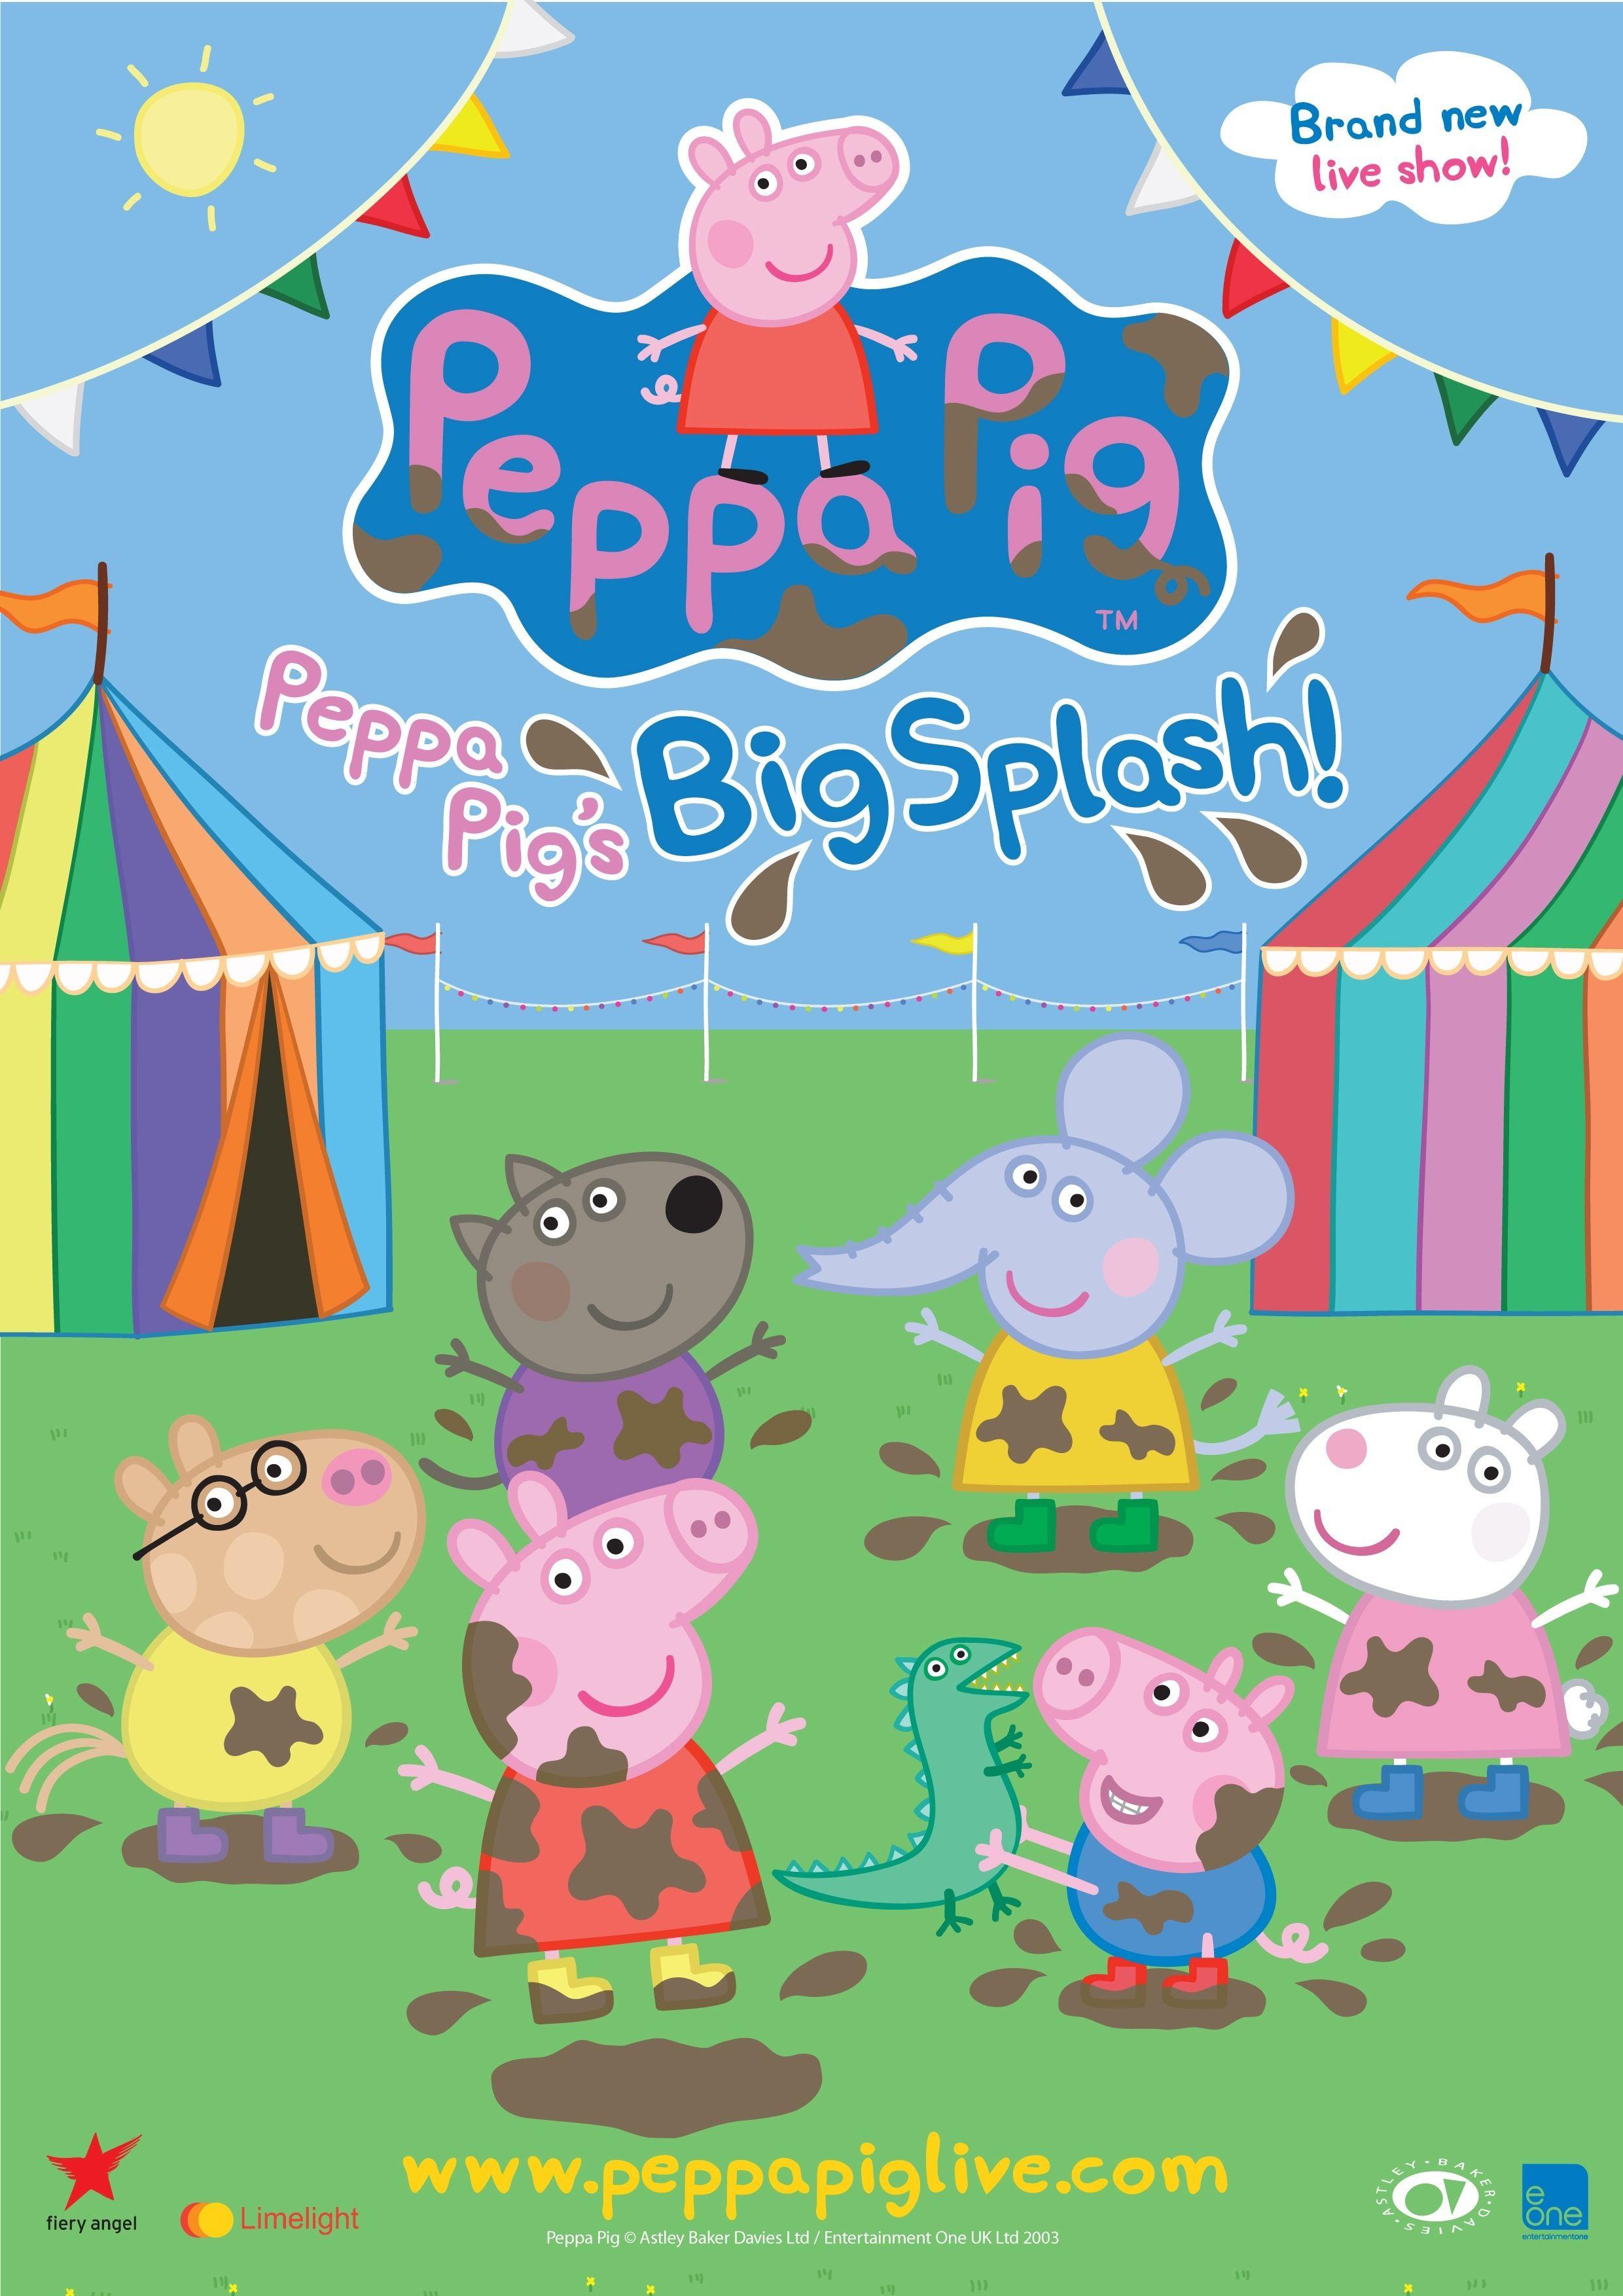 Win a family ticket to see Peppa Pig LIVE